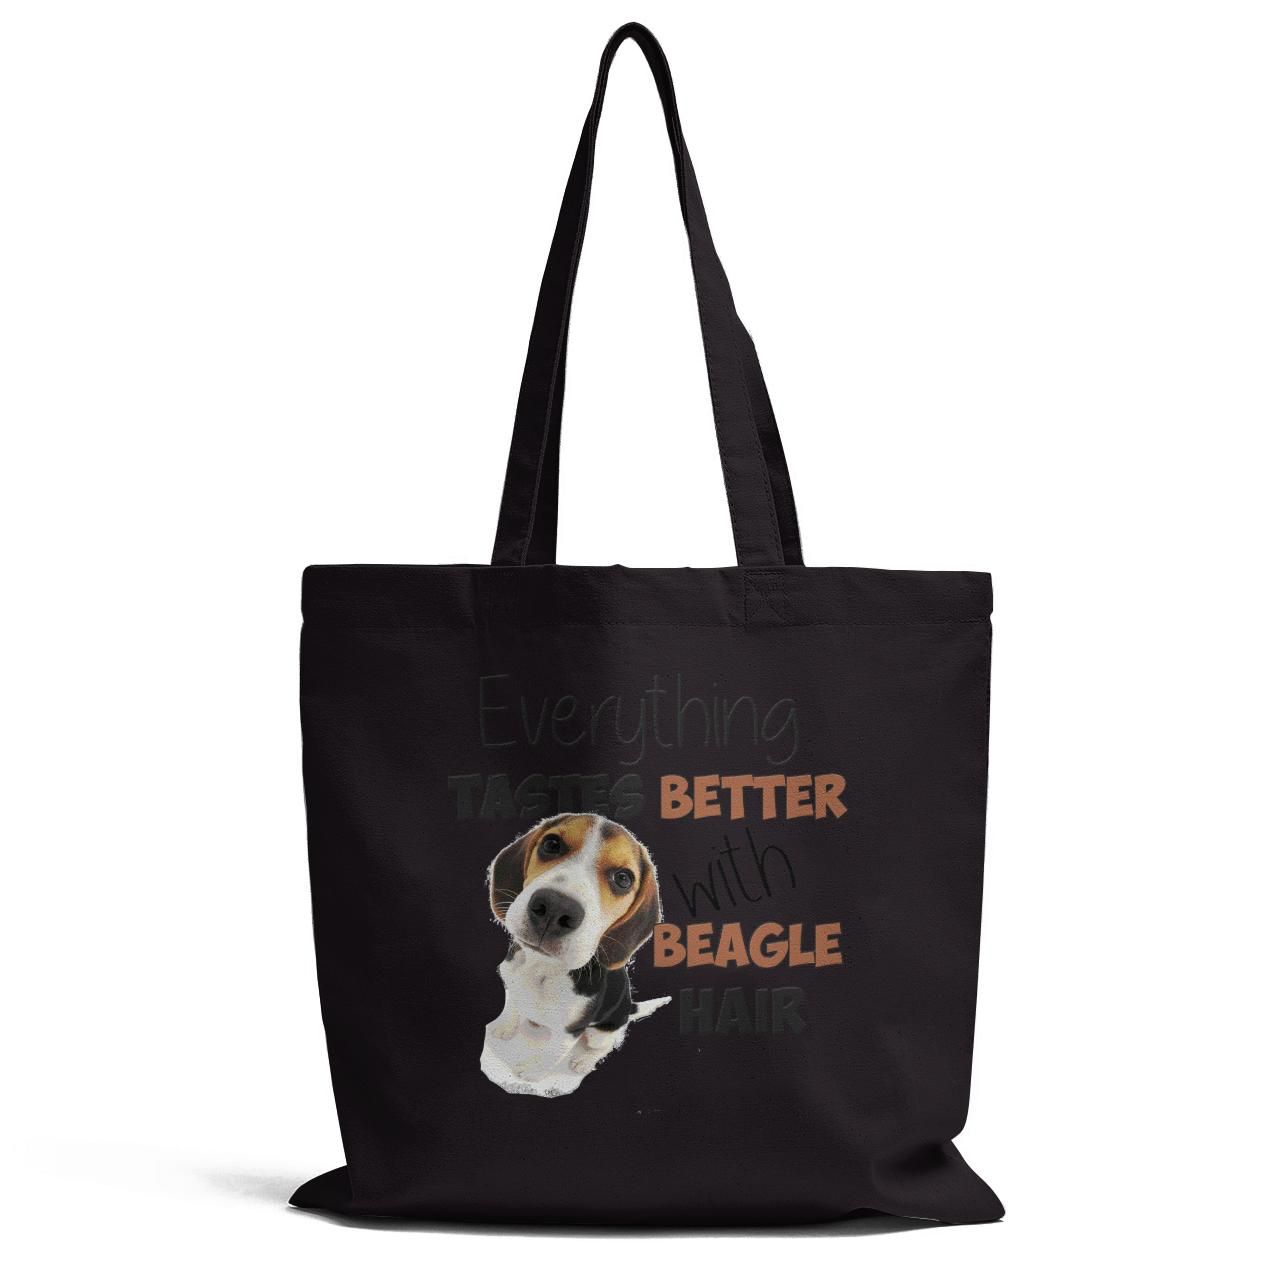 Everything Tastes Better With Beagle Hair Tote Bag